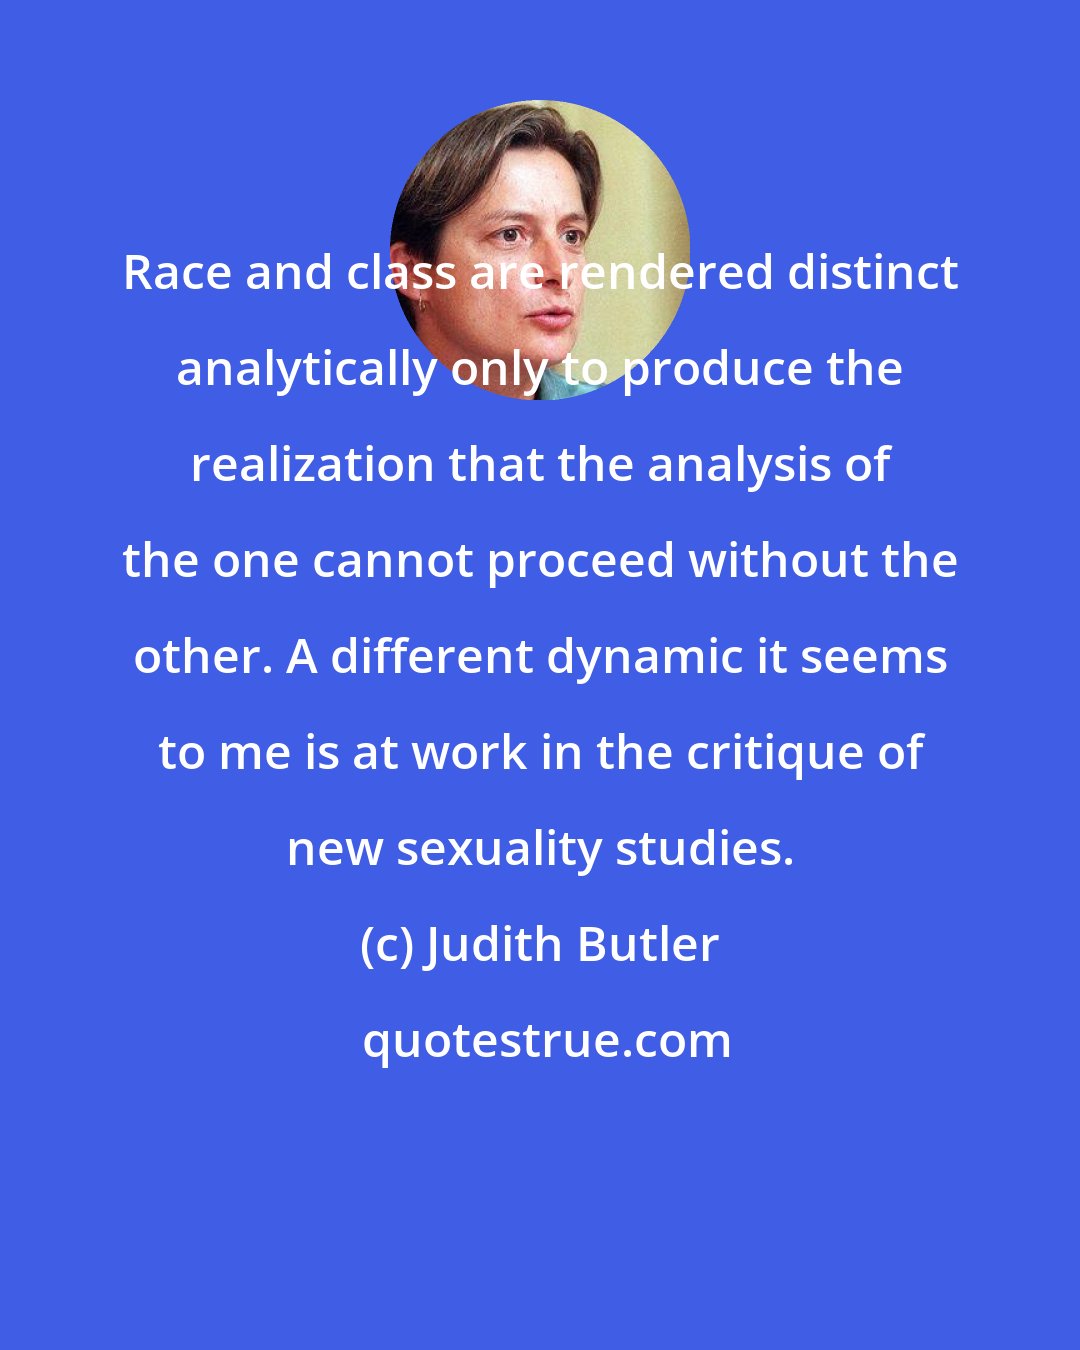 Judith Butler: Race and class are rendered distinct analytically only to produce the realization that the analysis of the one cannot proceed without the other. A different dynamic it seems to me is at work in the critique of new sexuality studies.